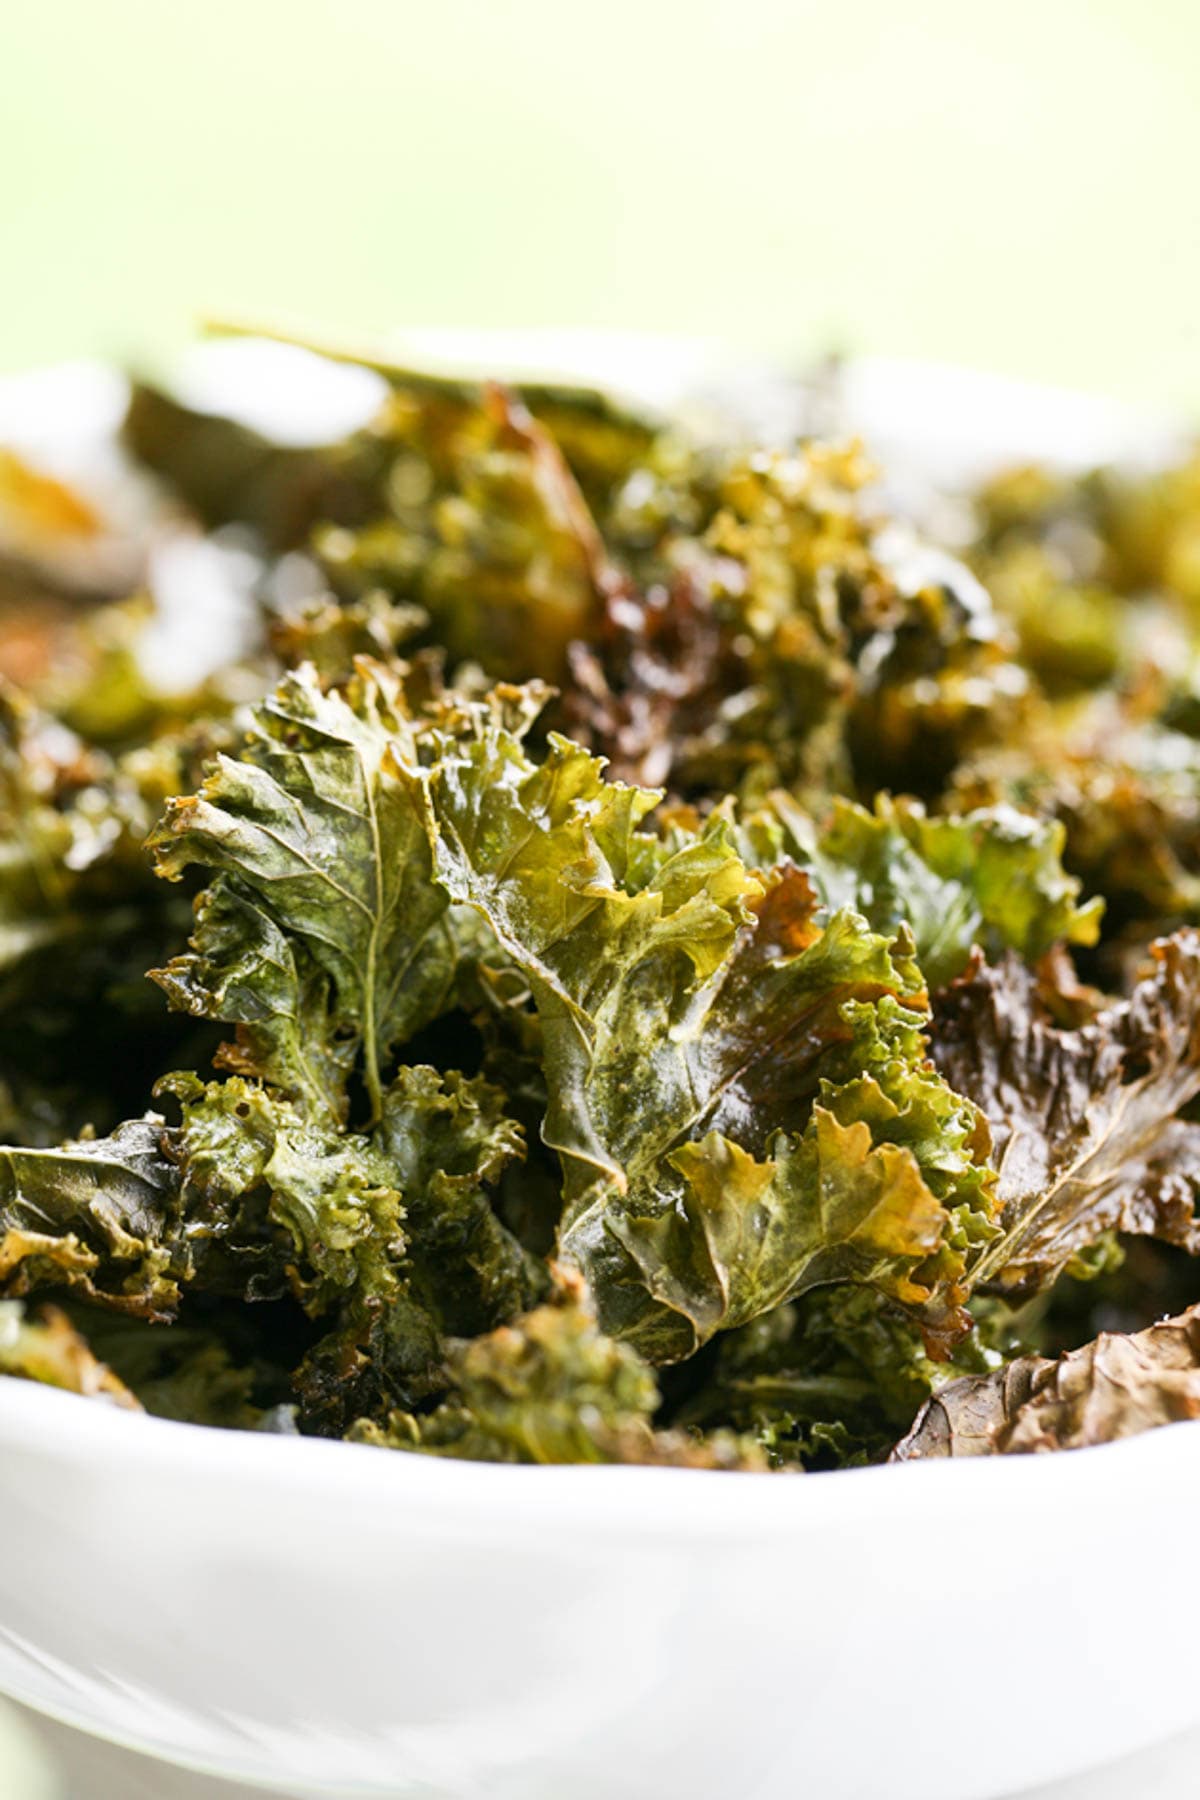 Dehydrated kale chips.